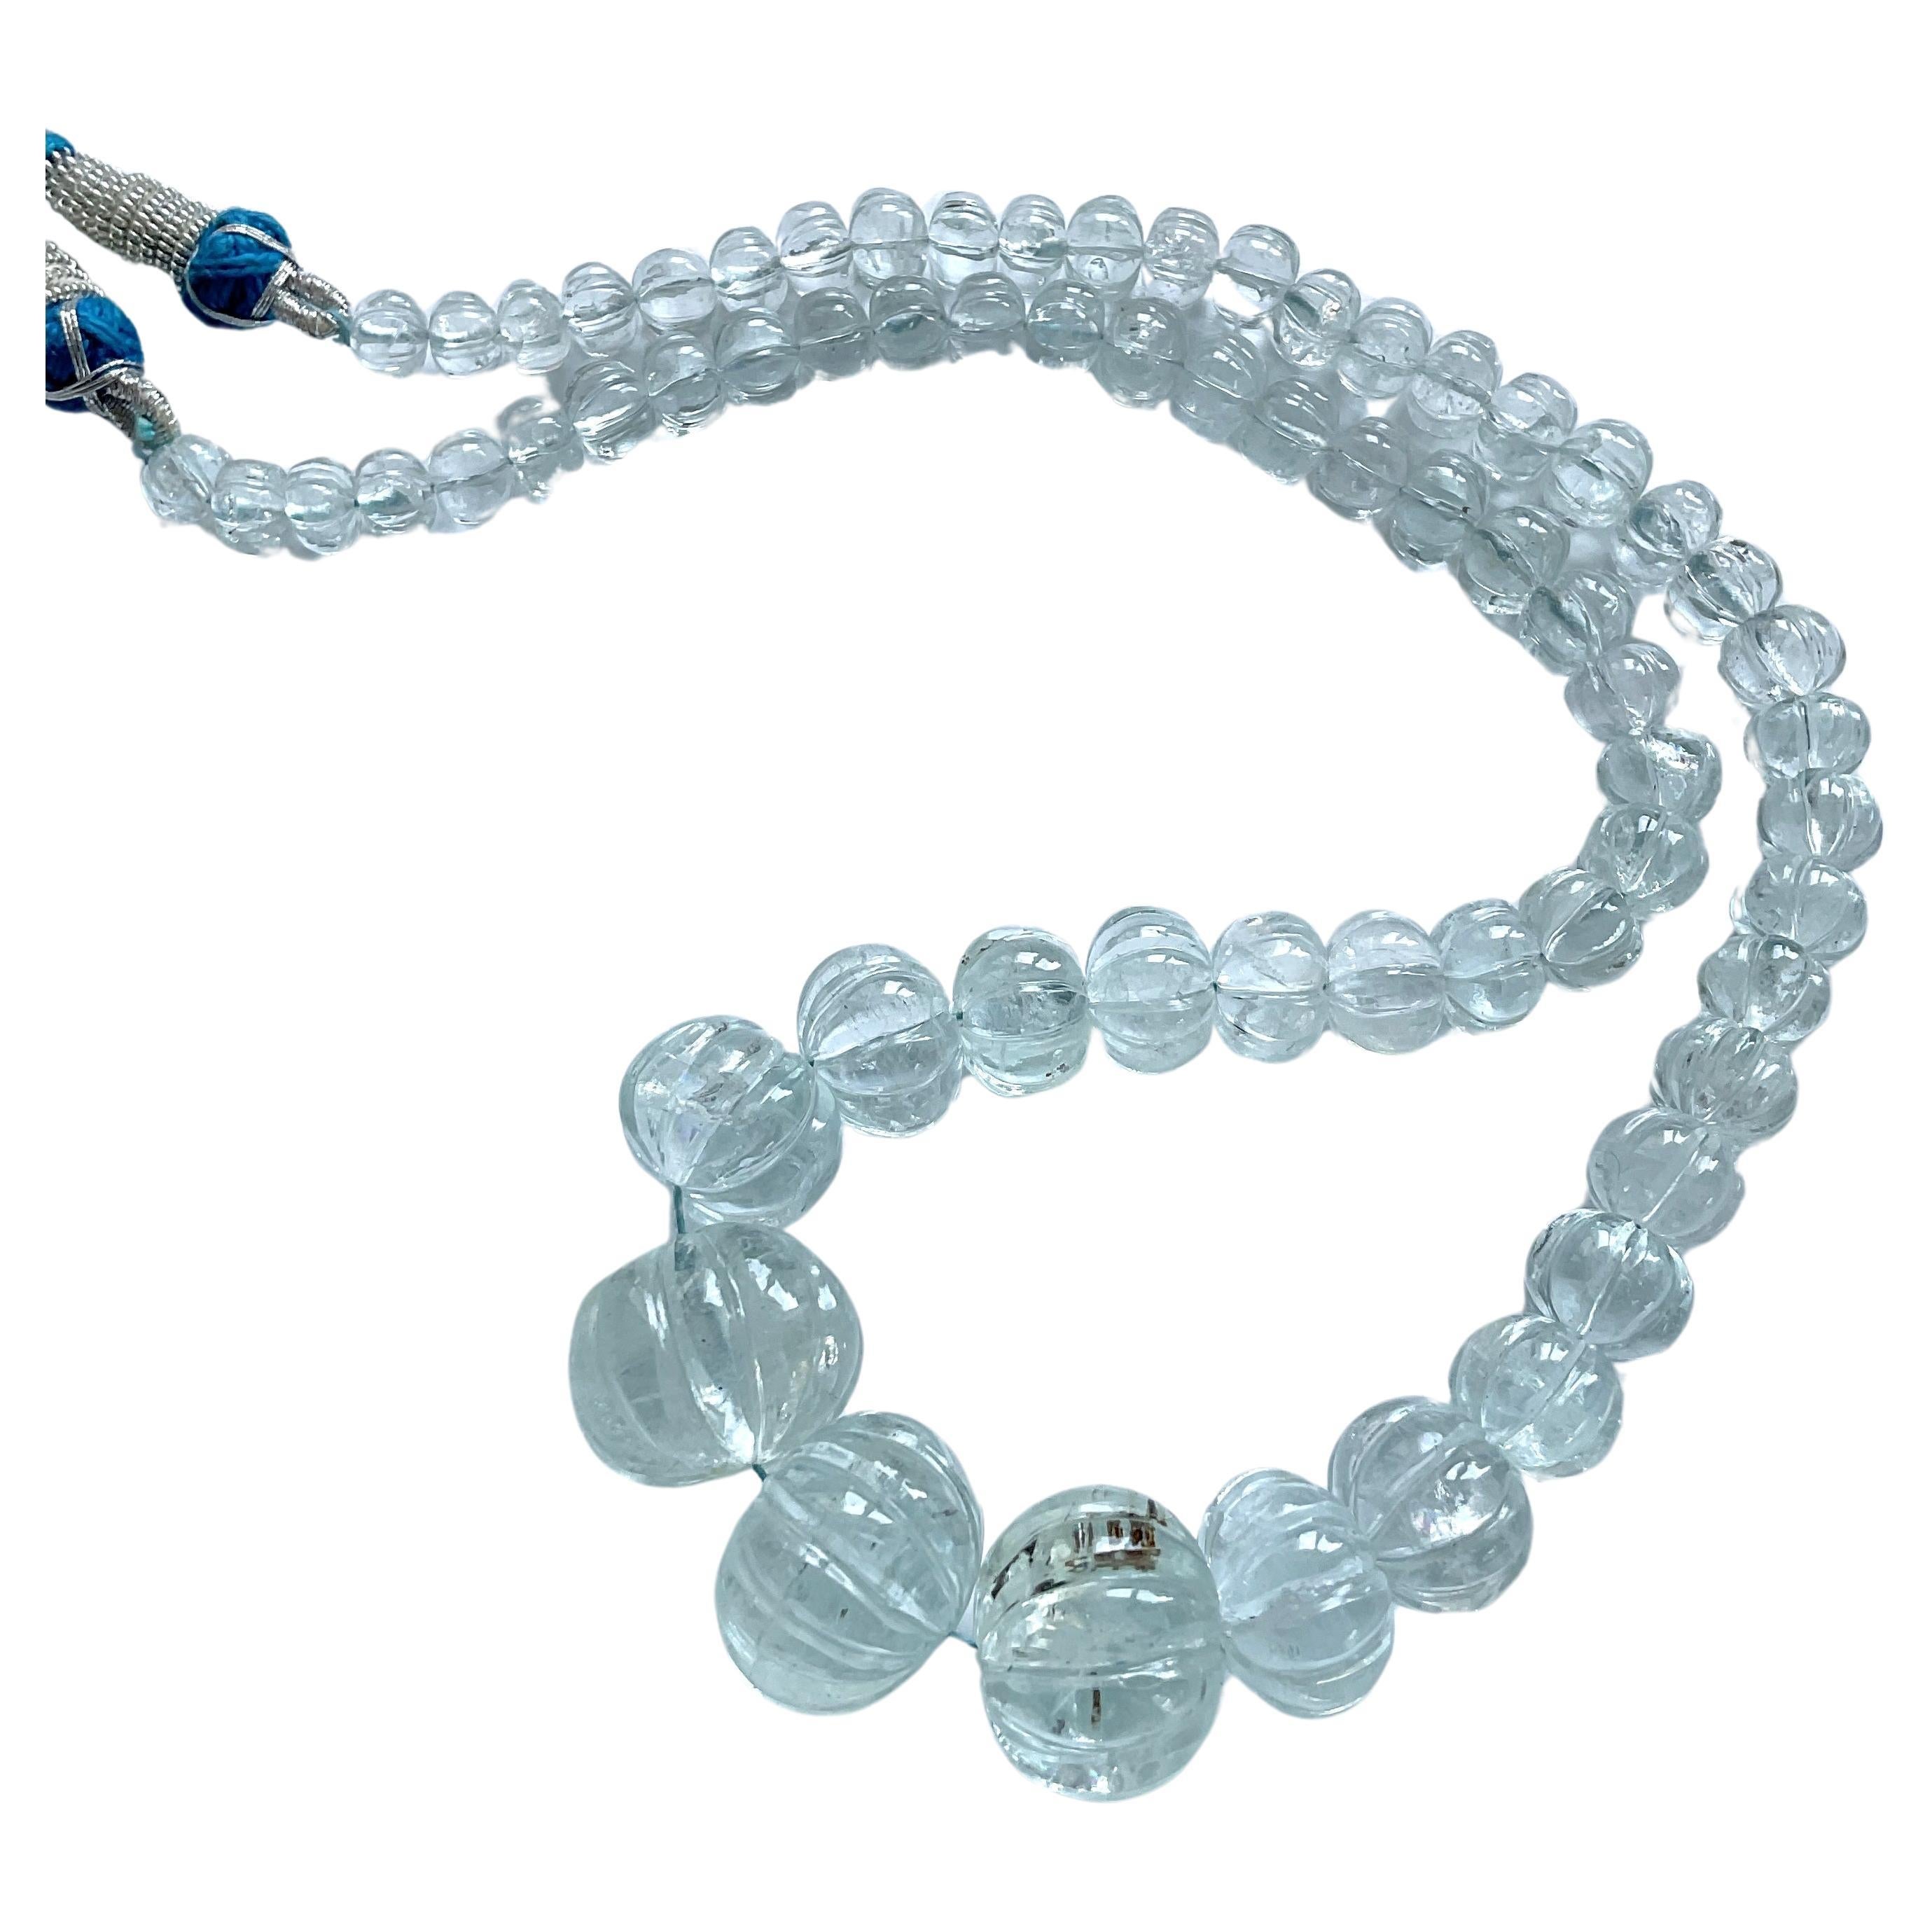 327.80 Carats Aquamarine Carved Melon Beads Necklace Natural Gemstone For Sale